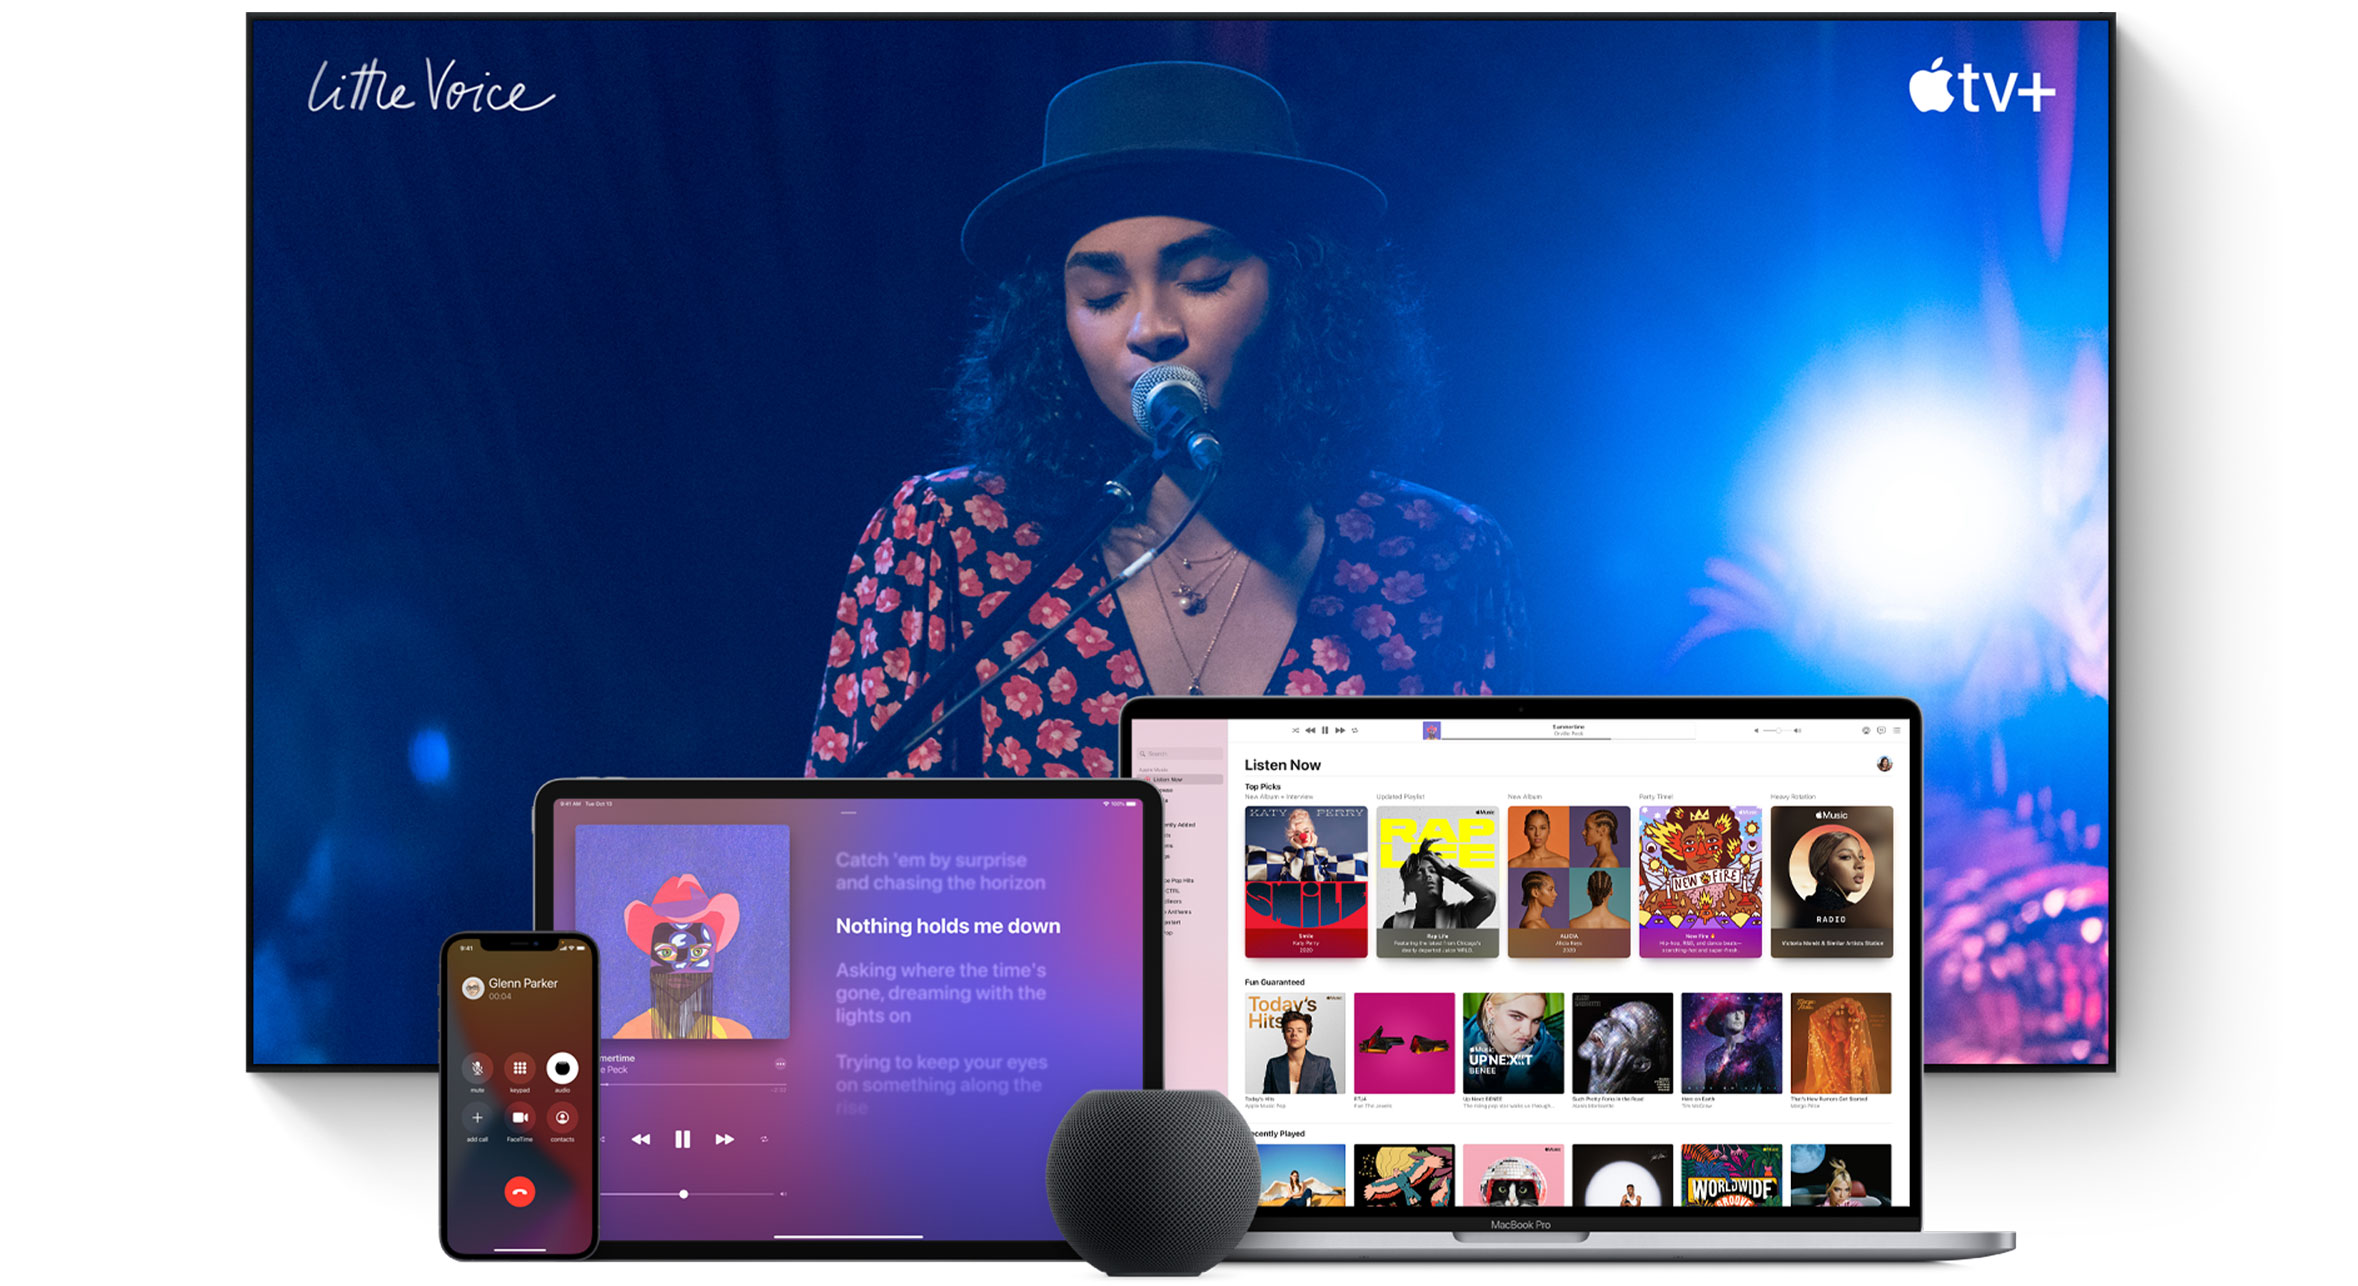 Large TV screen with a woman singing. A MacBook Pro, an iPad, an iPhone, and a Space Gray HomePod mini are arranged in front.